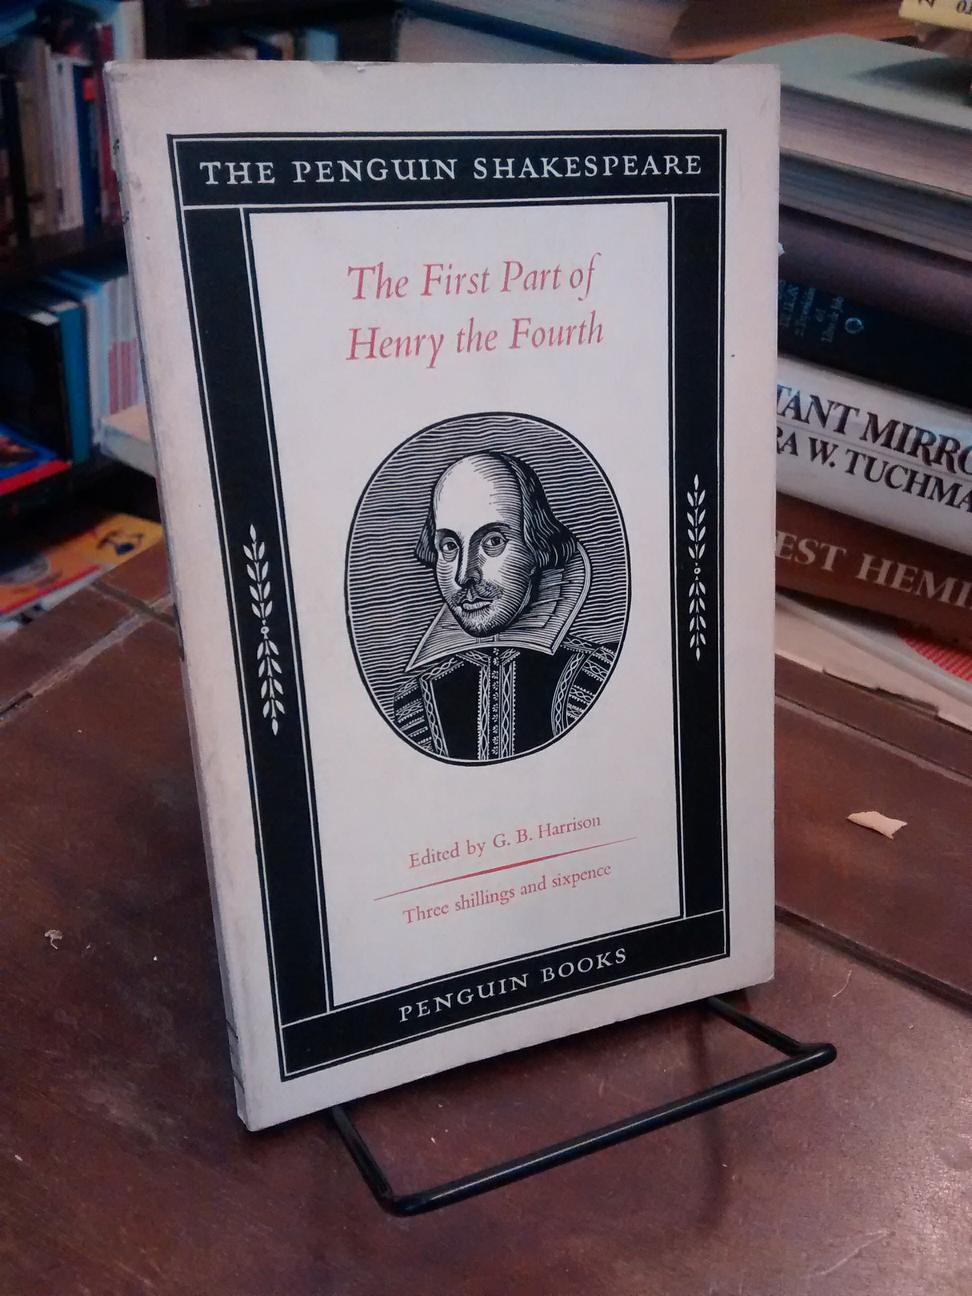 The First Parto of Henry the Fourth - William Shakespeare